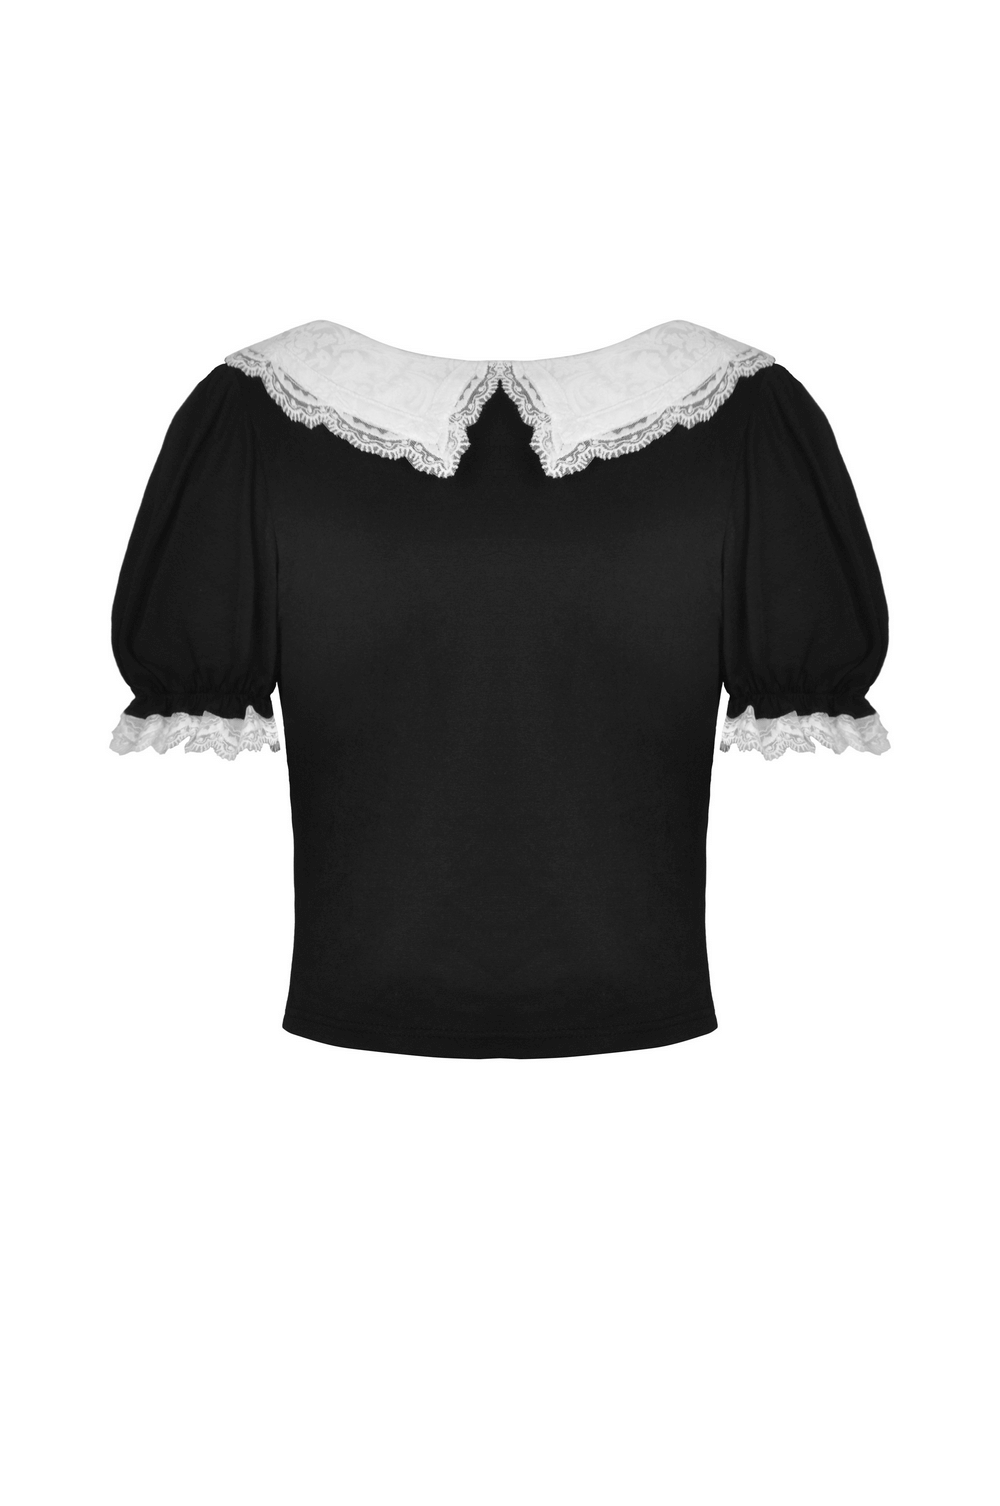 Stylish Black Crop Top with Scalloped Lace Collar